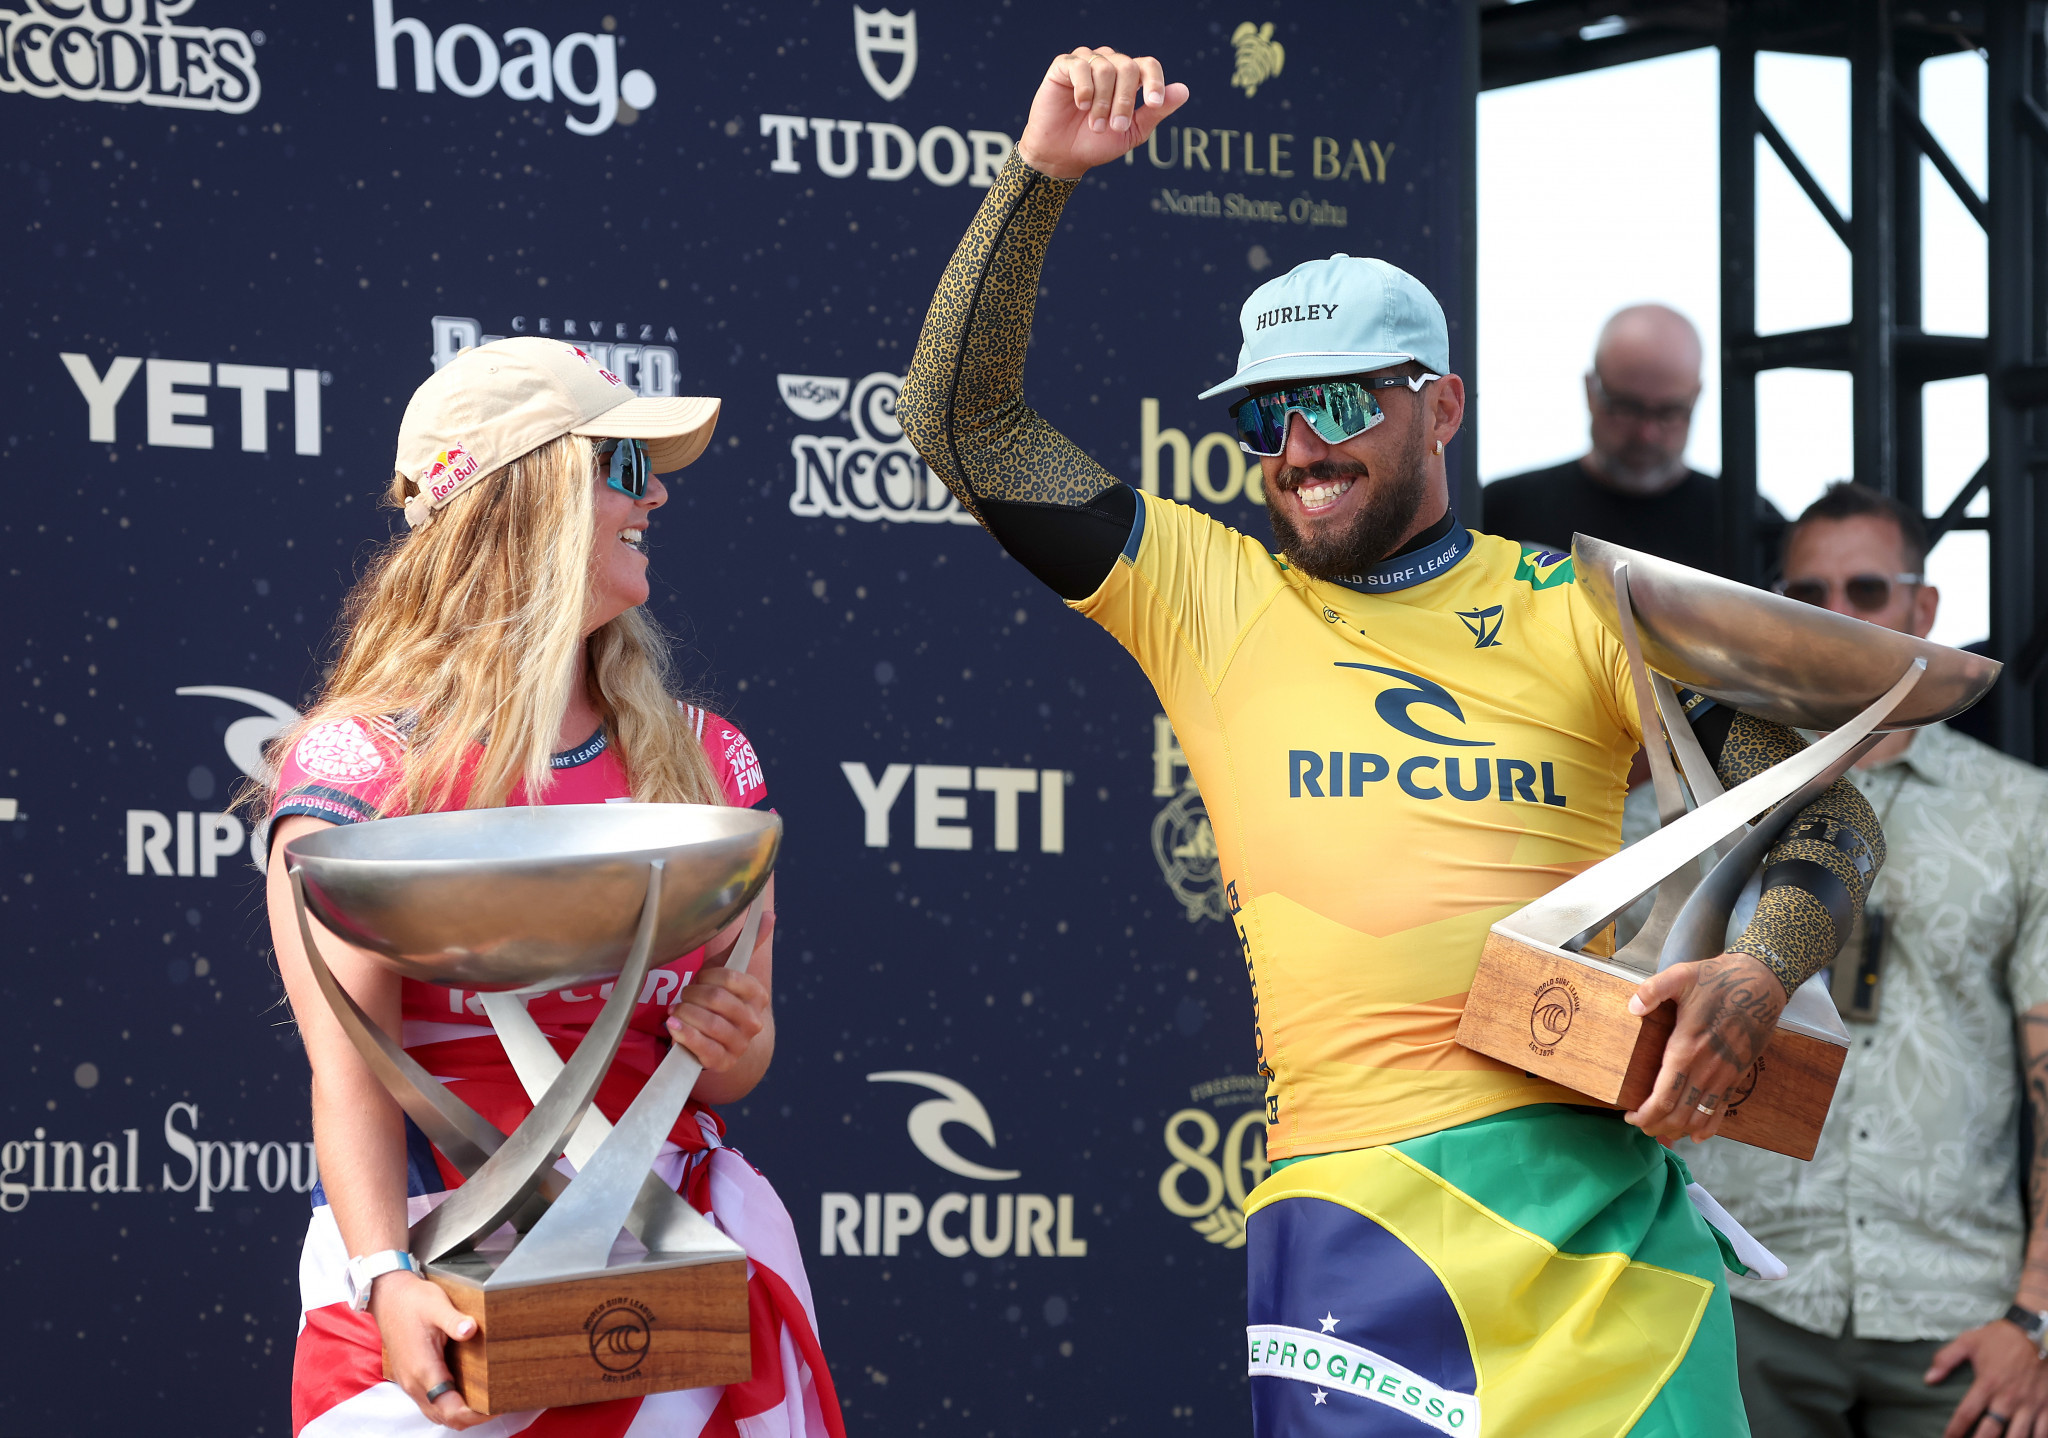 Brazil's Filipe Toledo, right, defended his men's title on the WSL while Caroline Marks of the US, left, earned the women's crown ©Getty Images